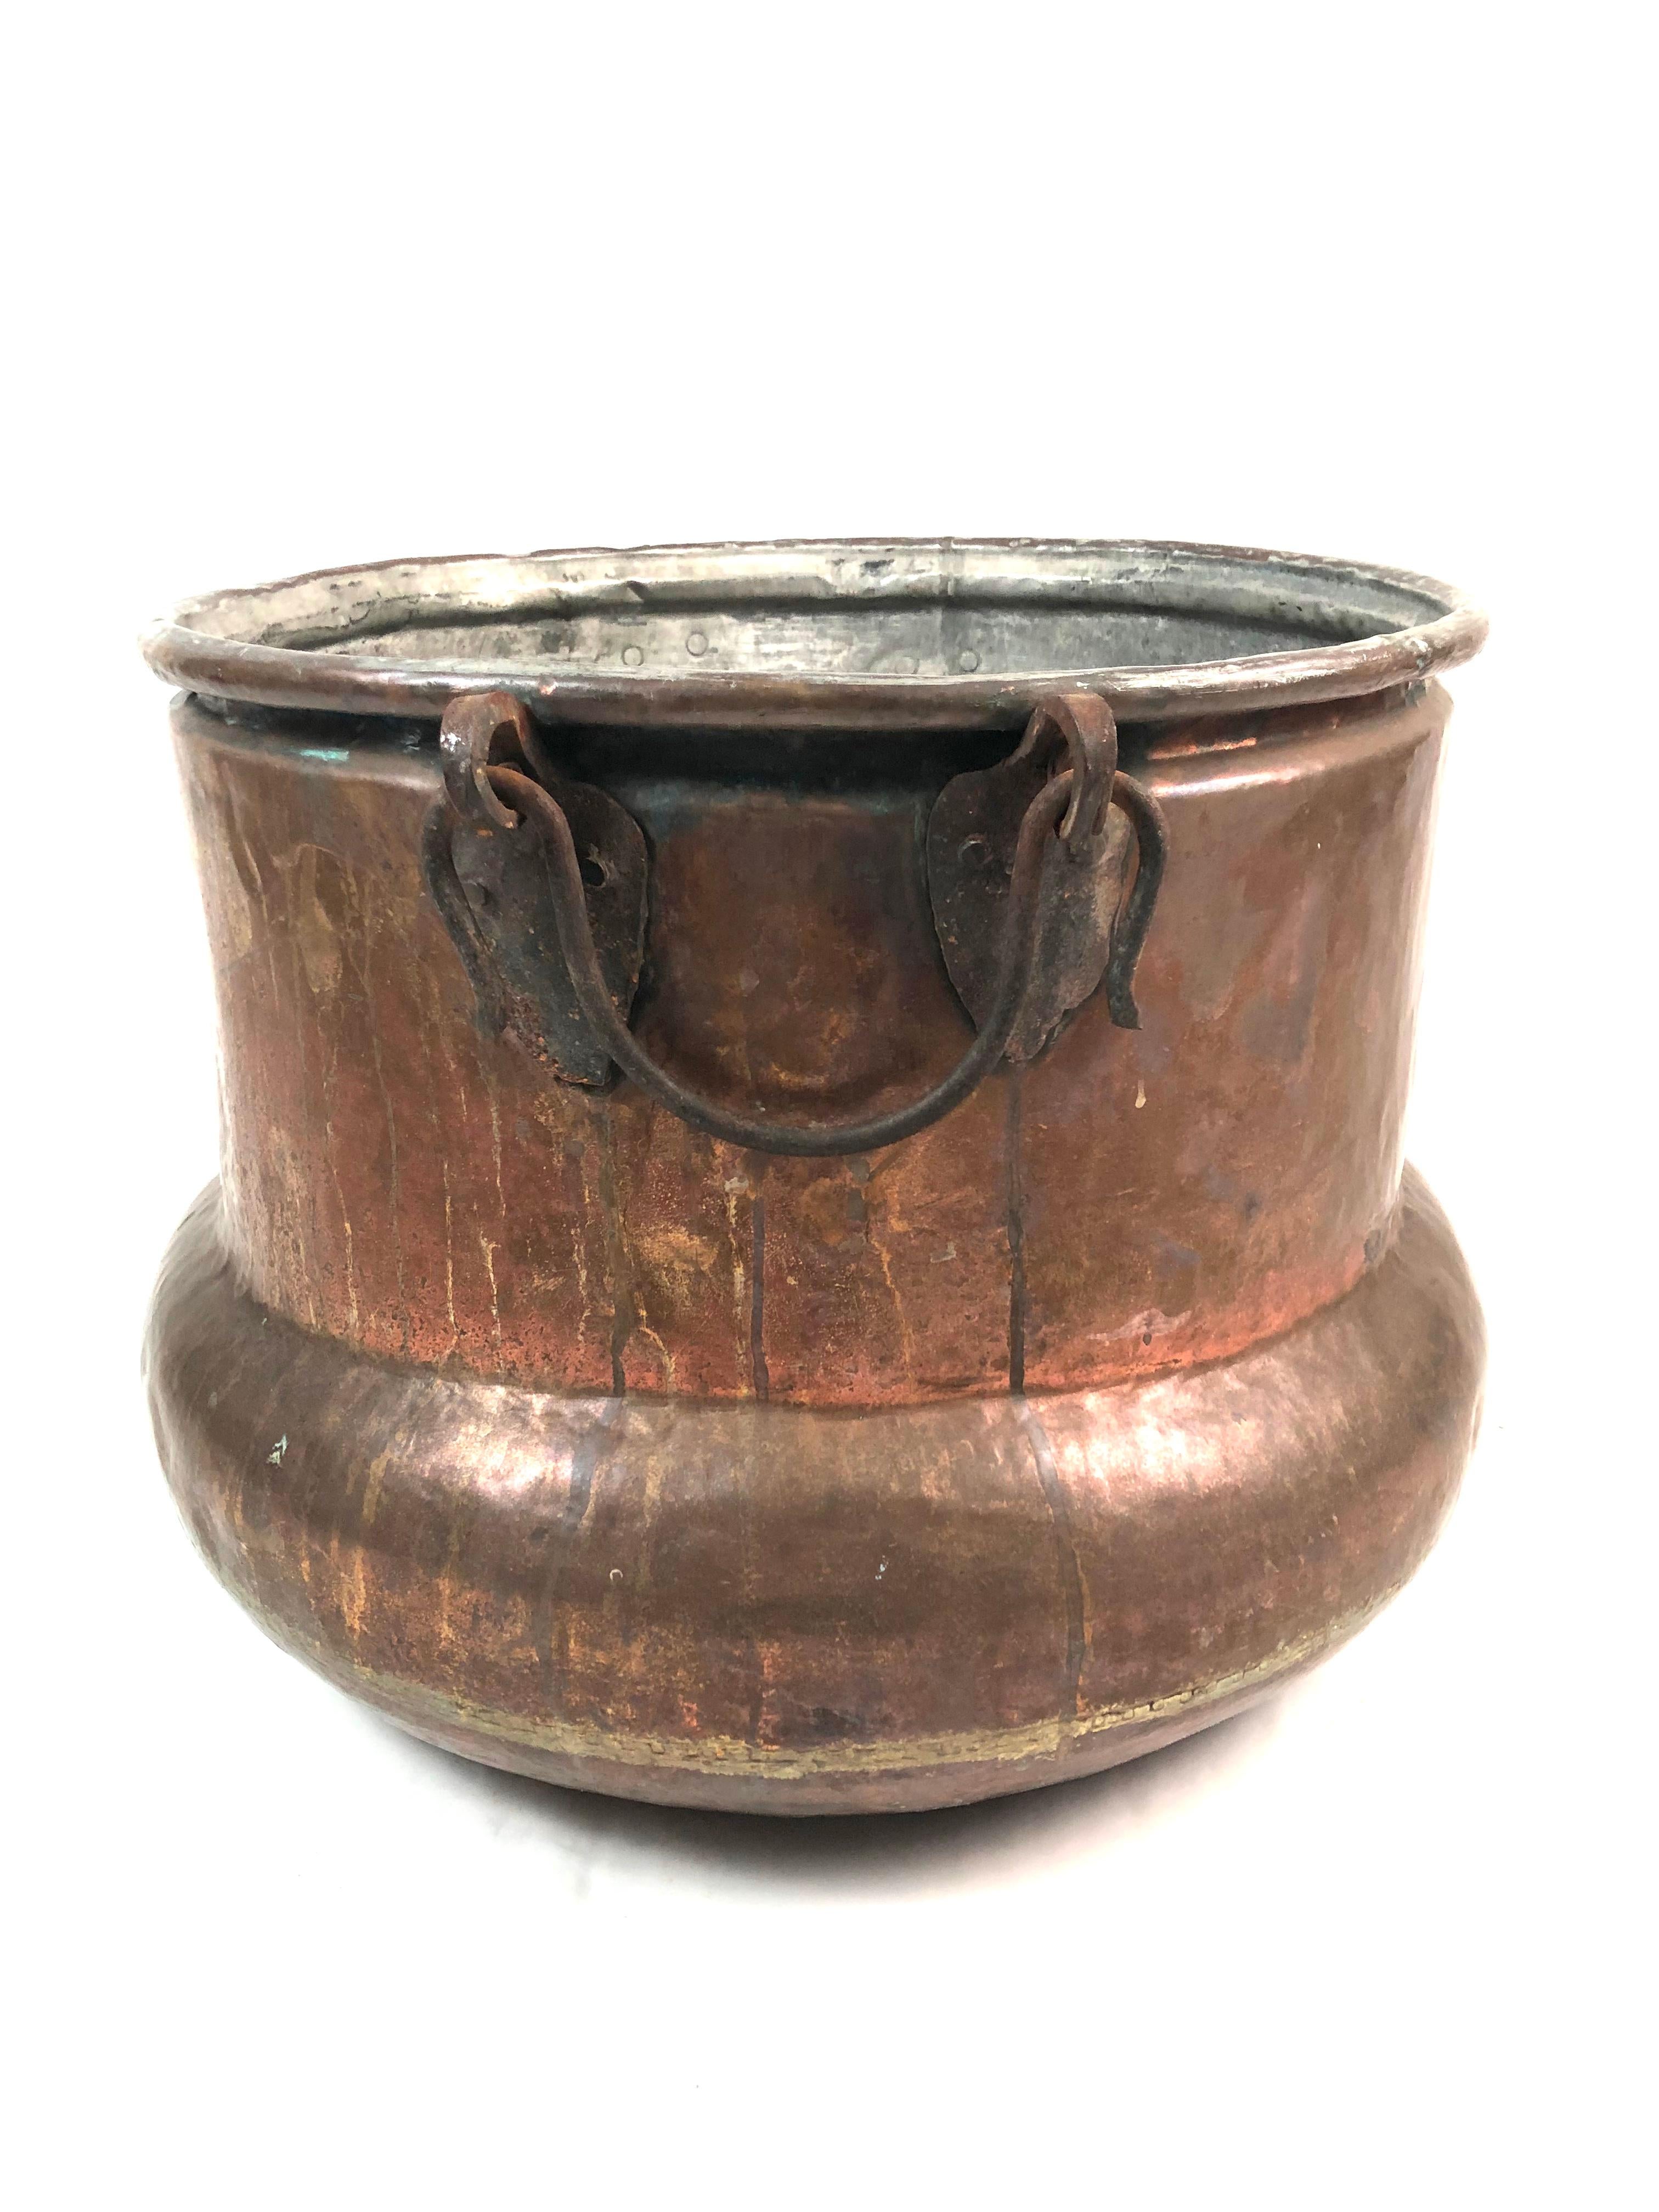 A large copper cauldron, or bucket, of circular form with larger lower section and 2 wrought iron carrying handles. Perfect for storing firewood.